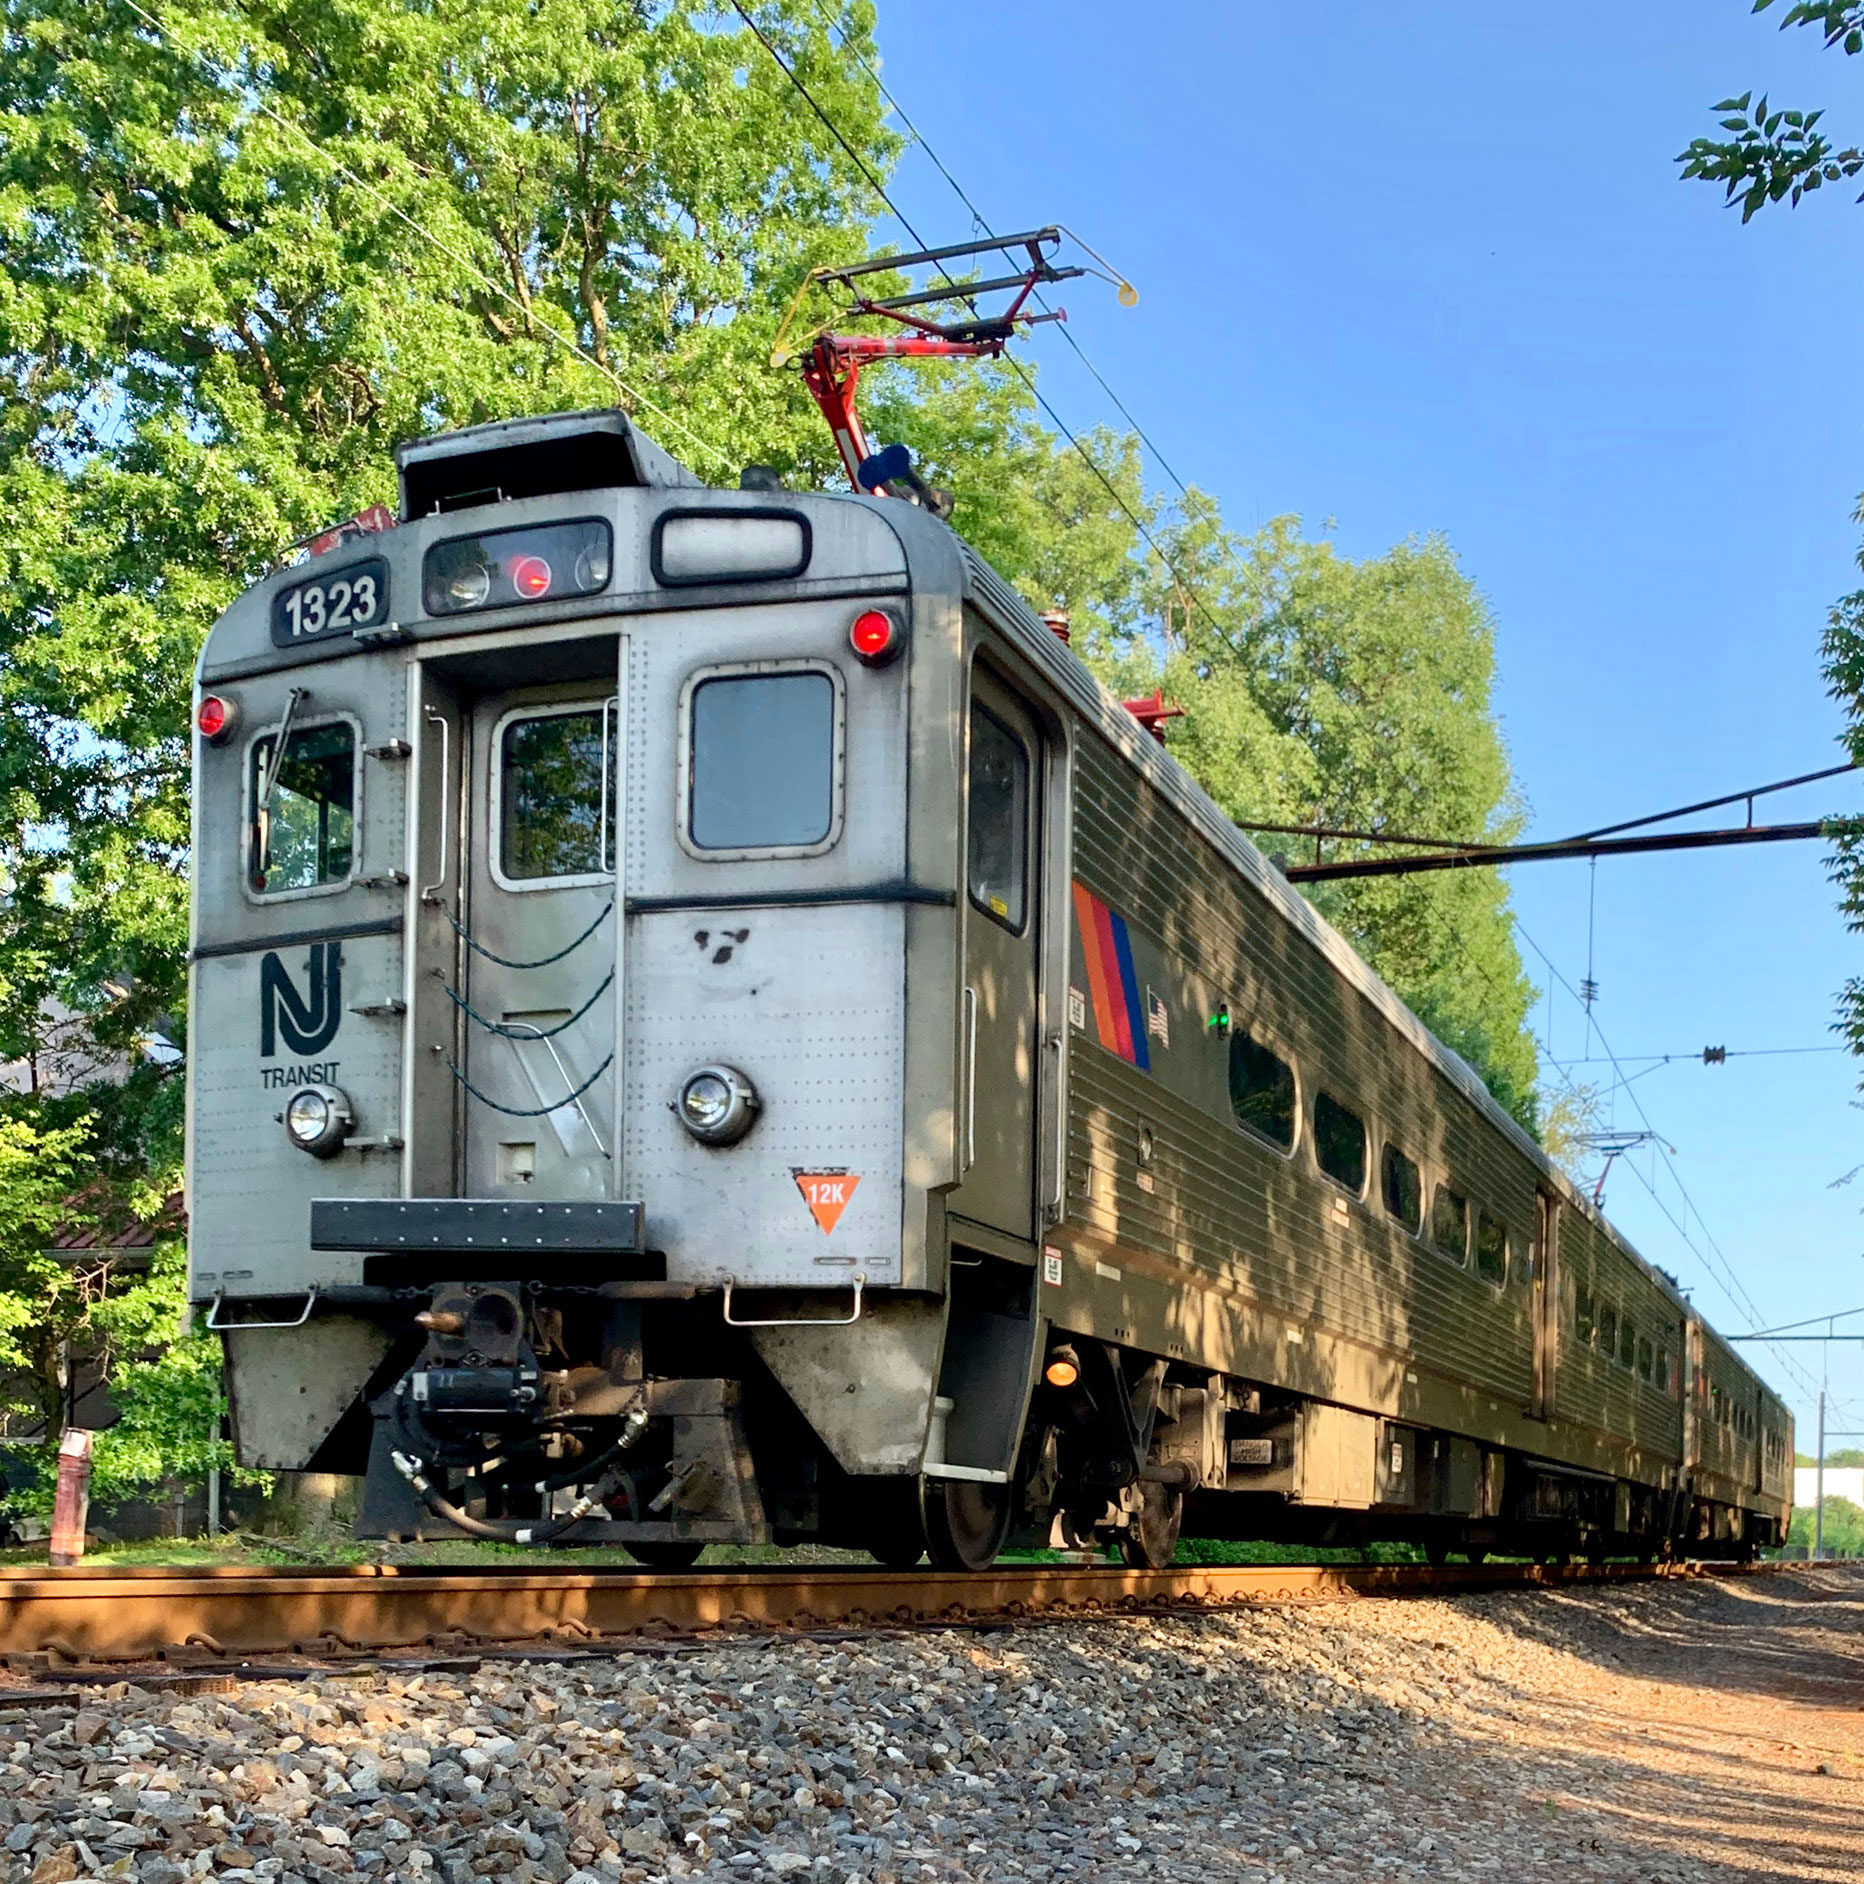 The DInky connects Princeton with the Northeast Corridor commuter line.